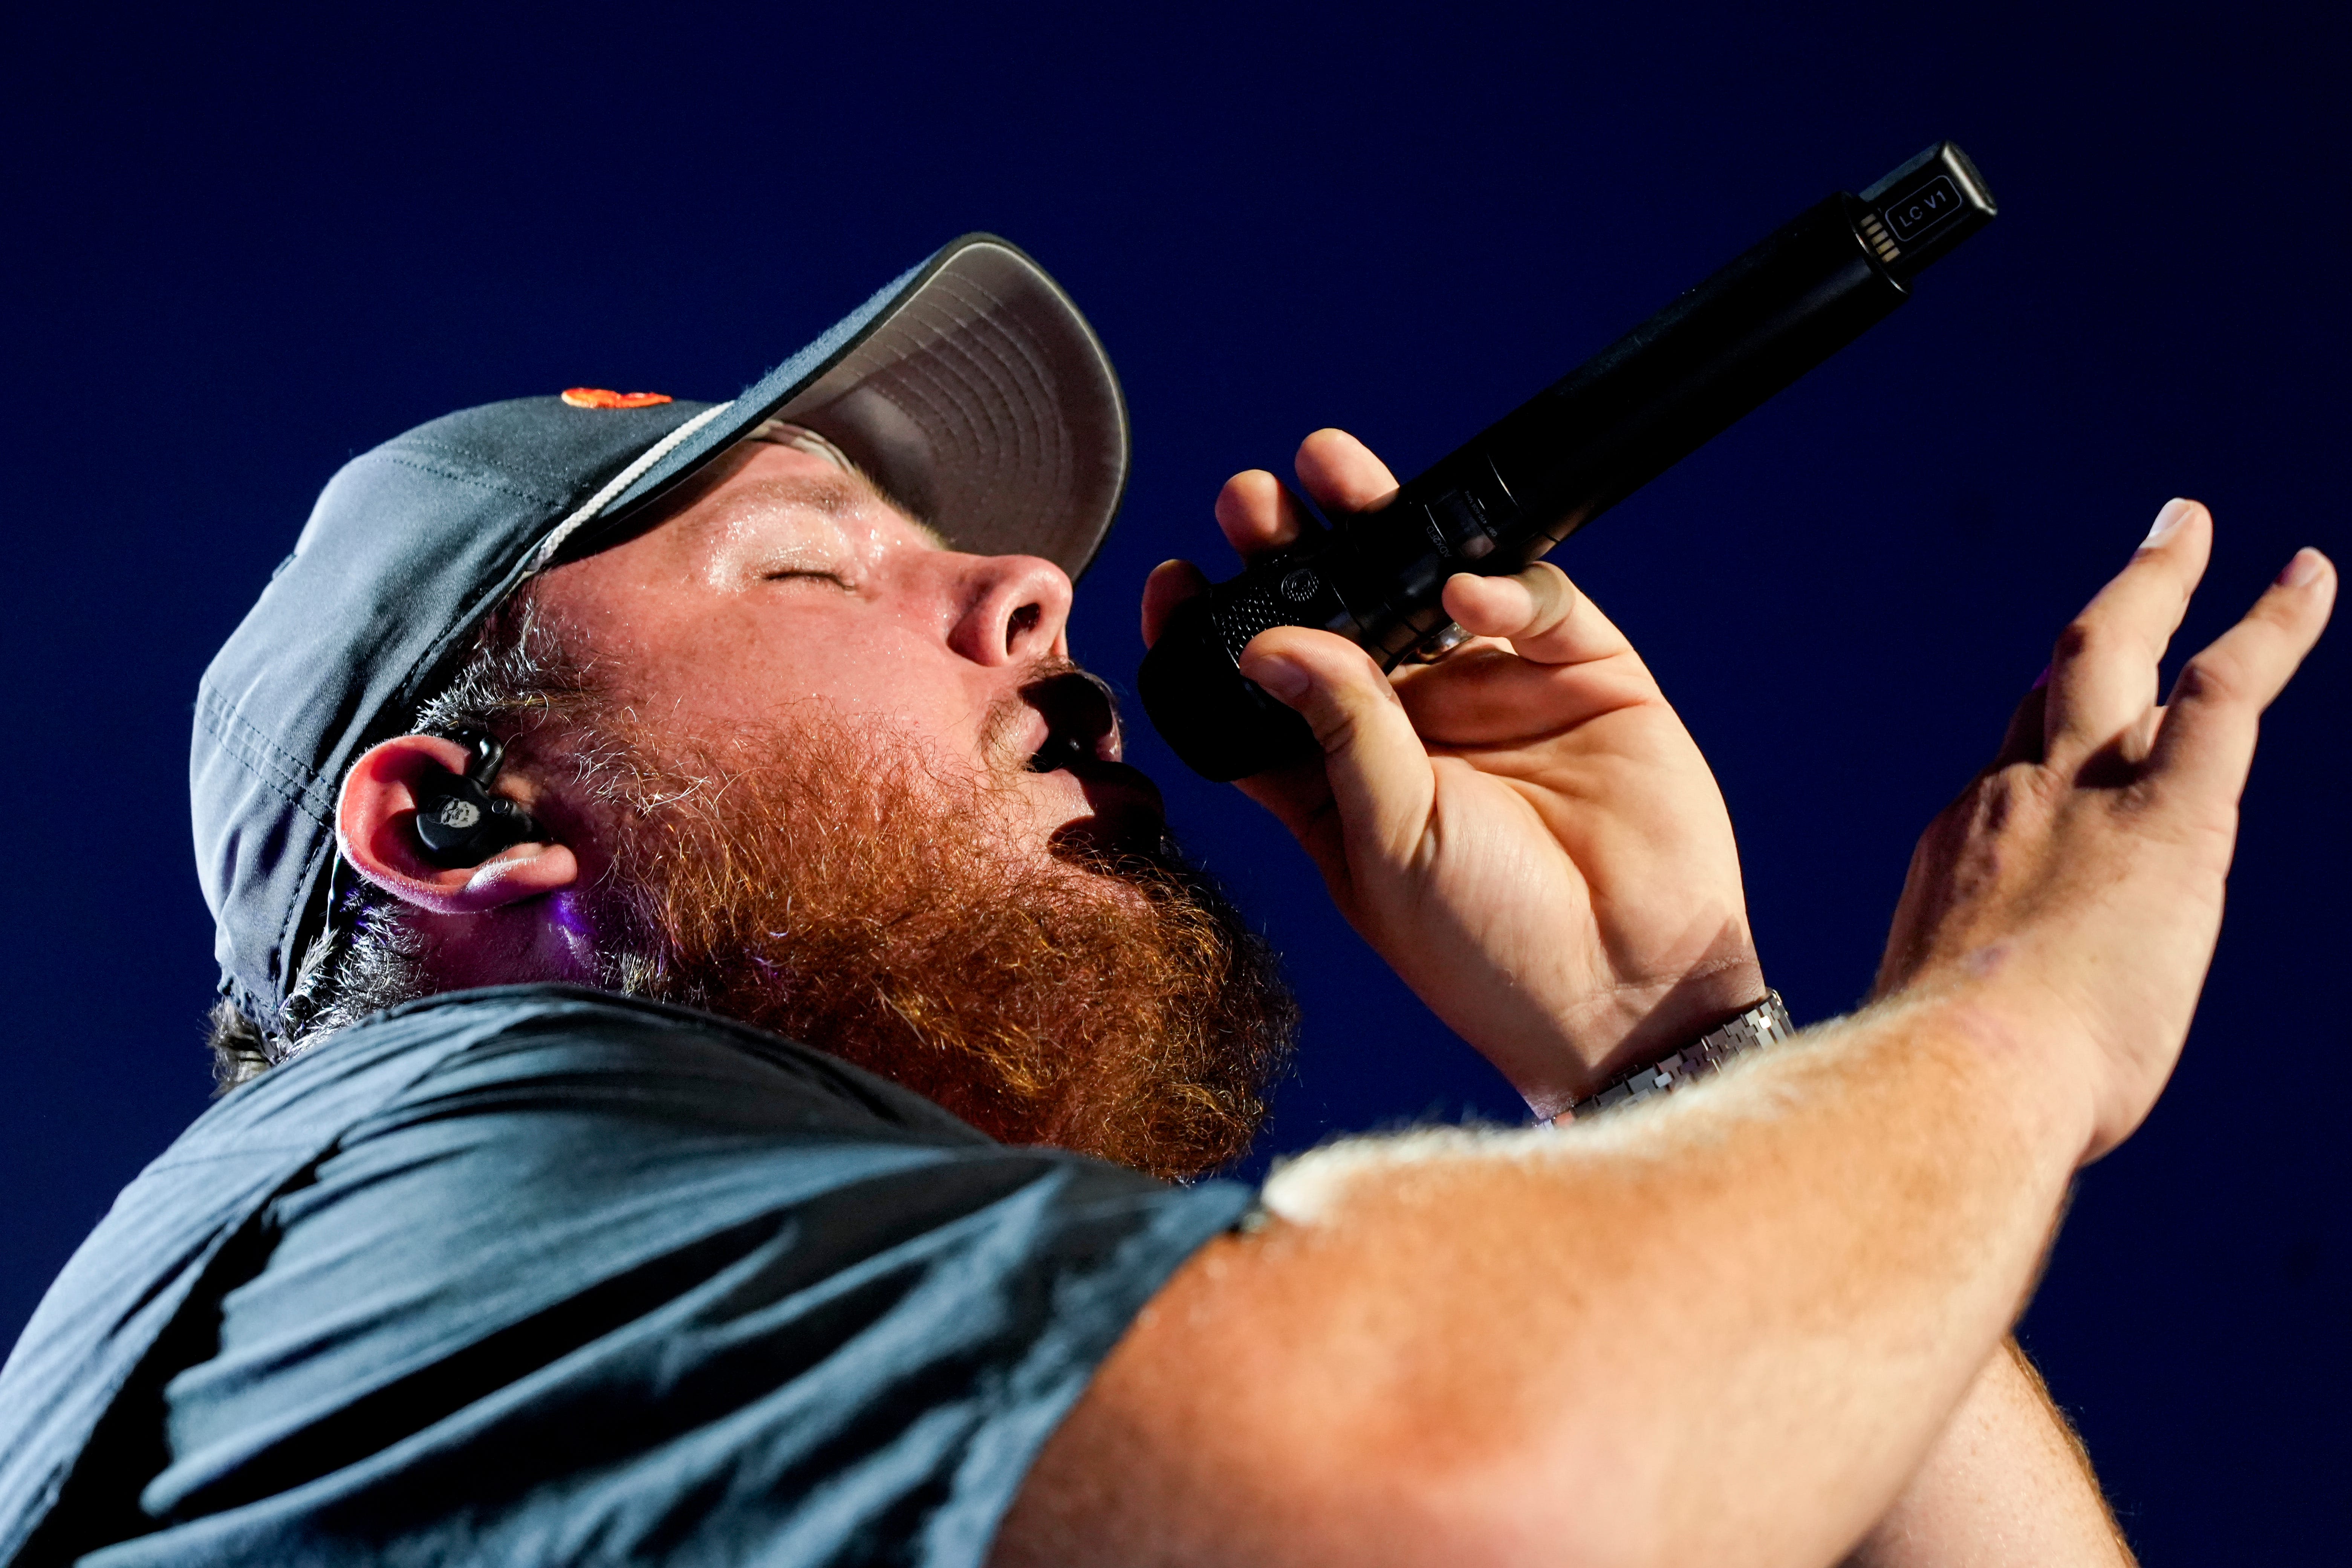 Luke Combs performs for a packed Paycor Stadium. Our favorite photos